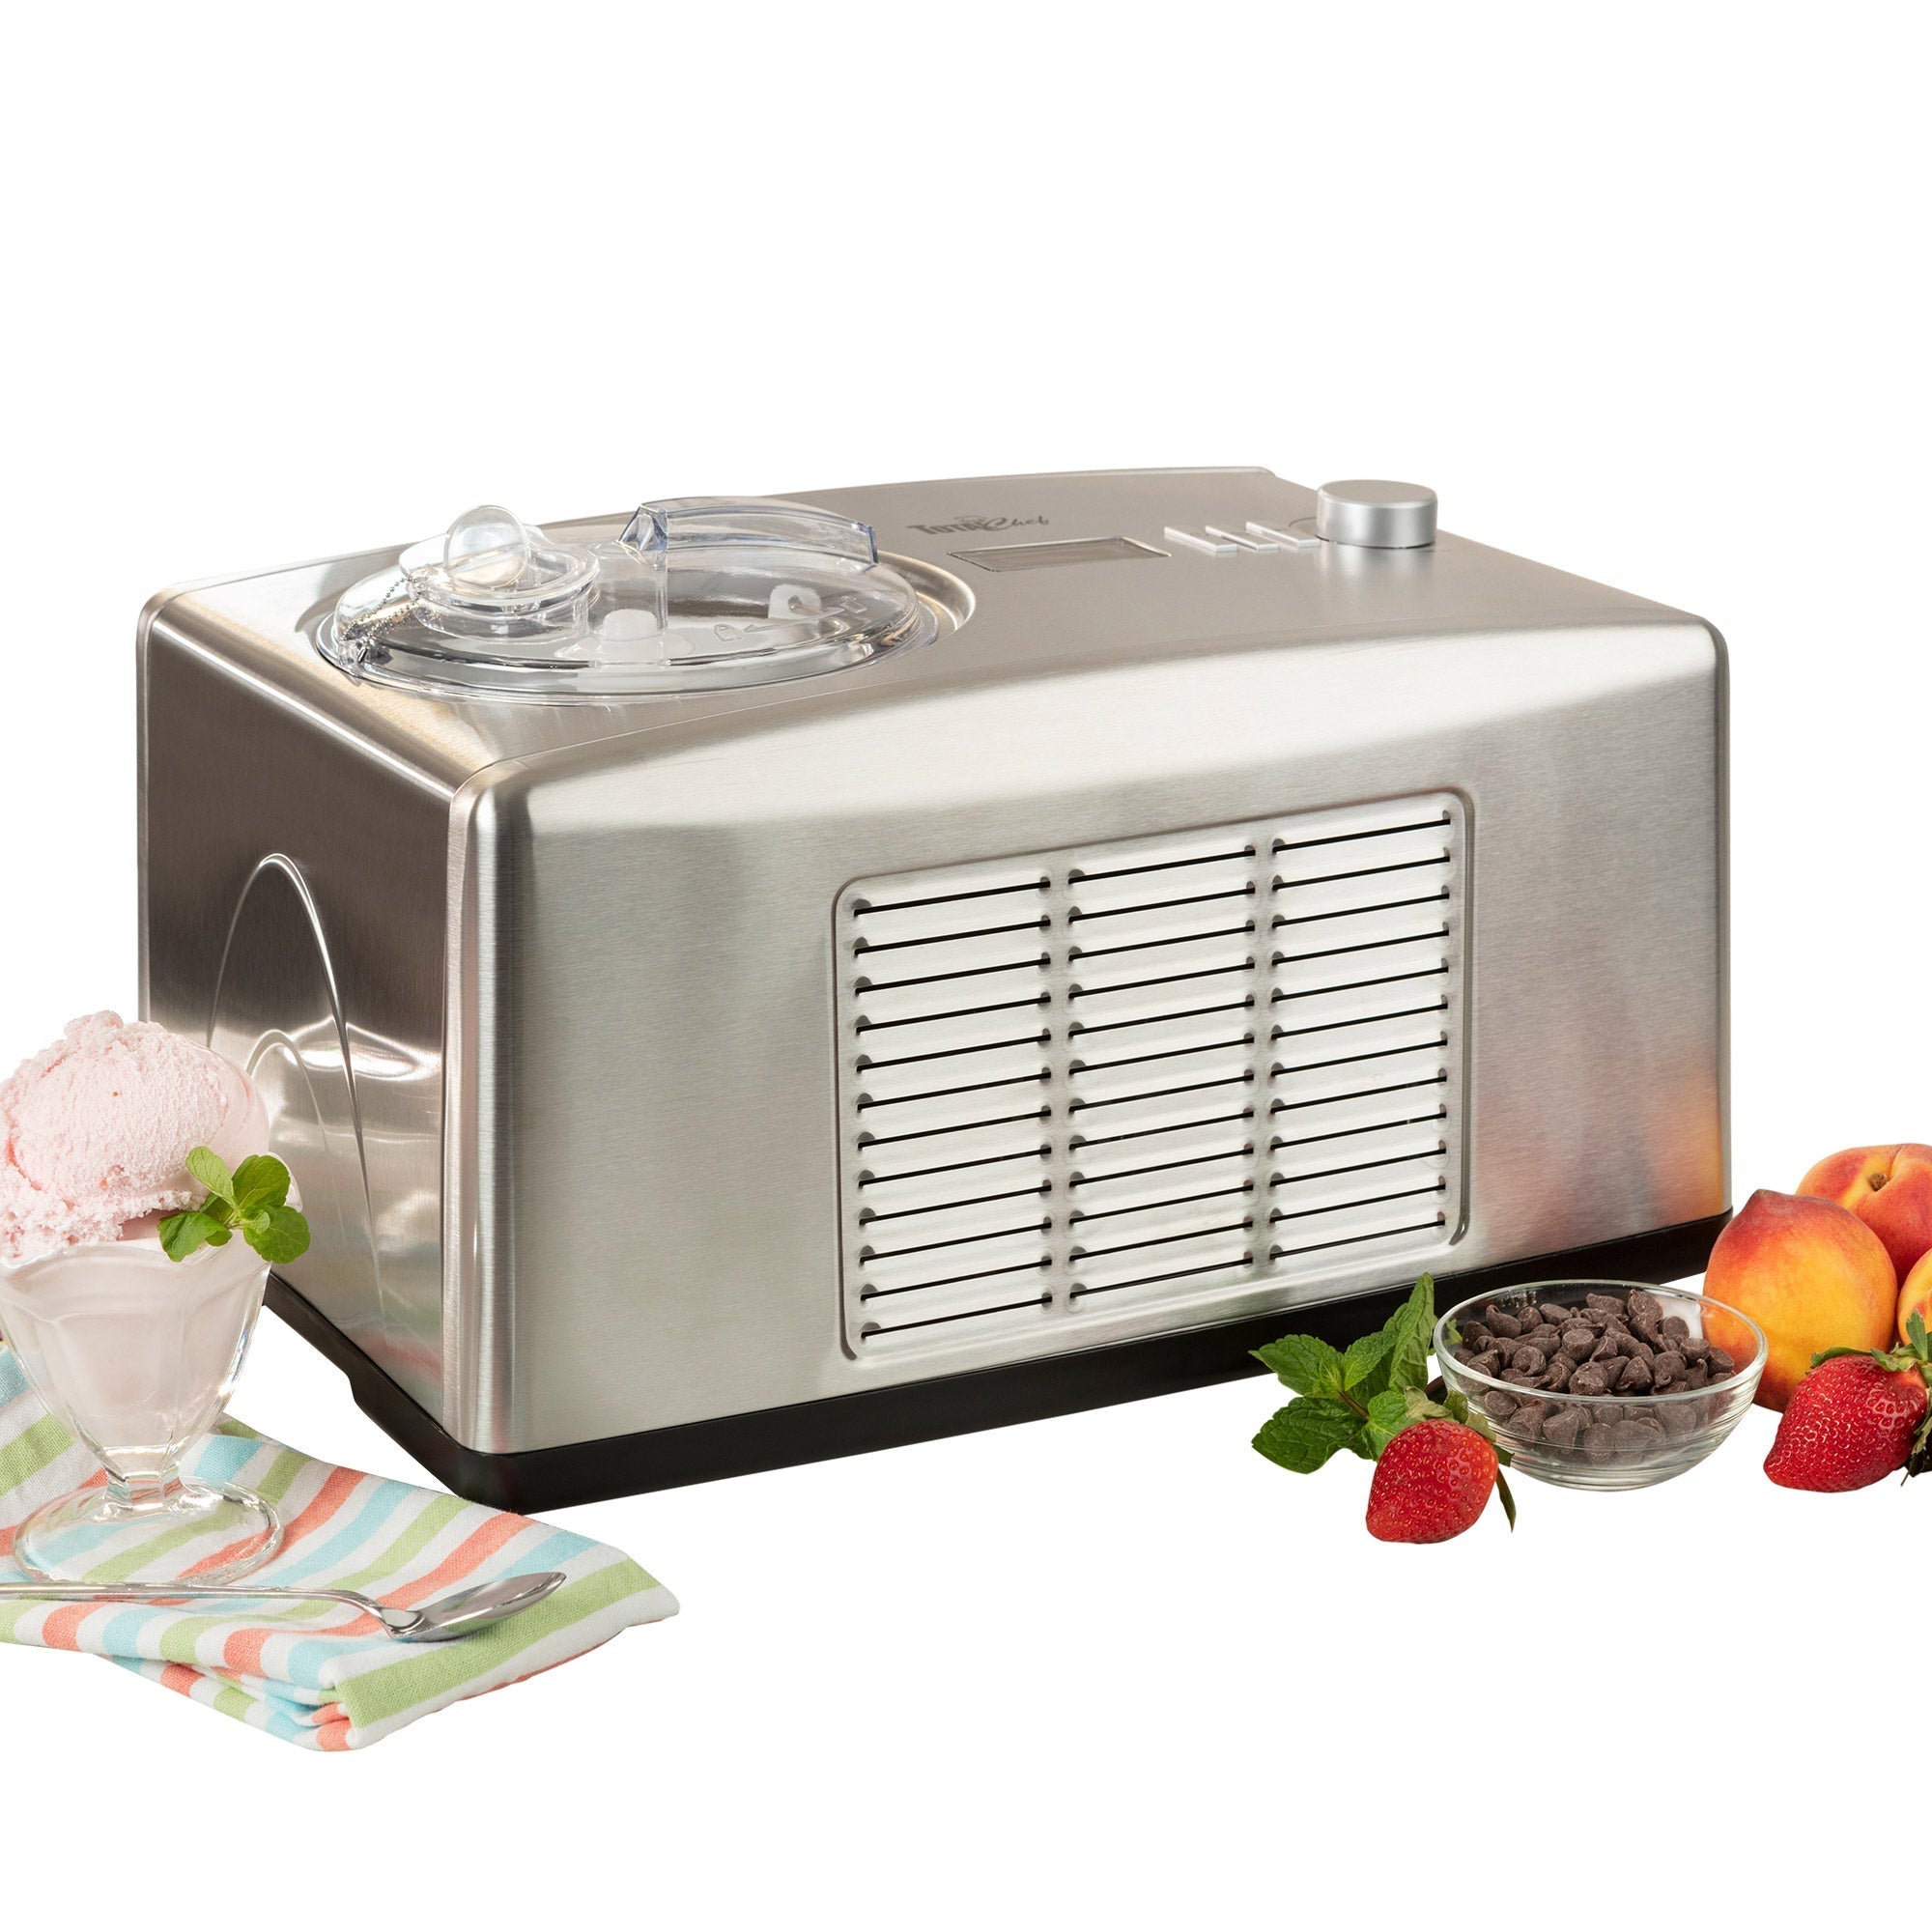 Product shot of ice cream maker on white background with a cup of light pink ice cream and a striped napkin to the left and fruits and chocolate chips on the right